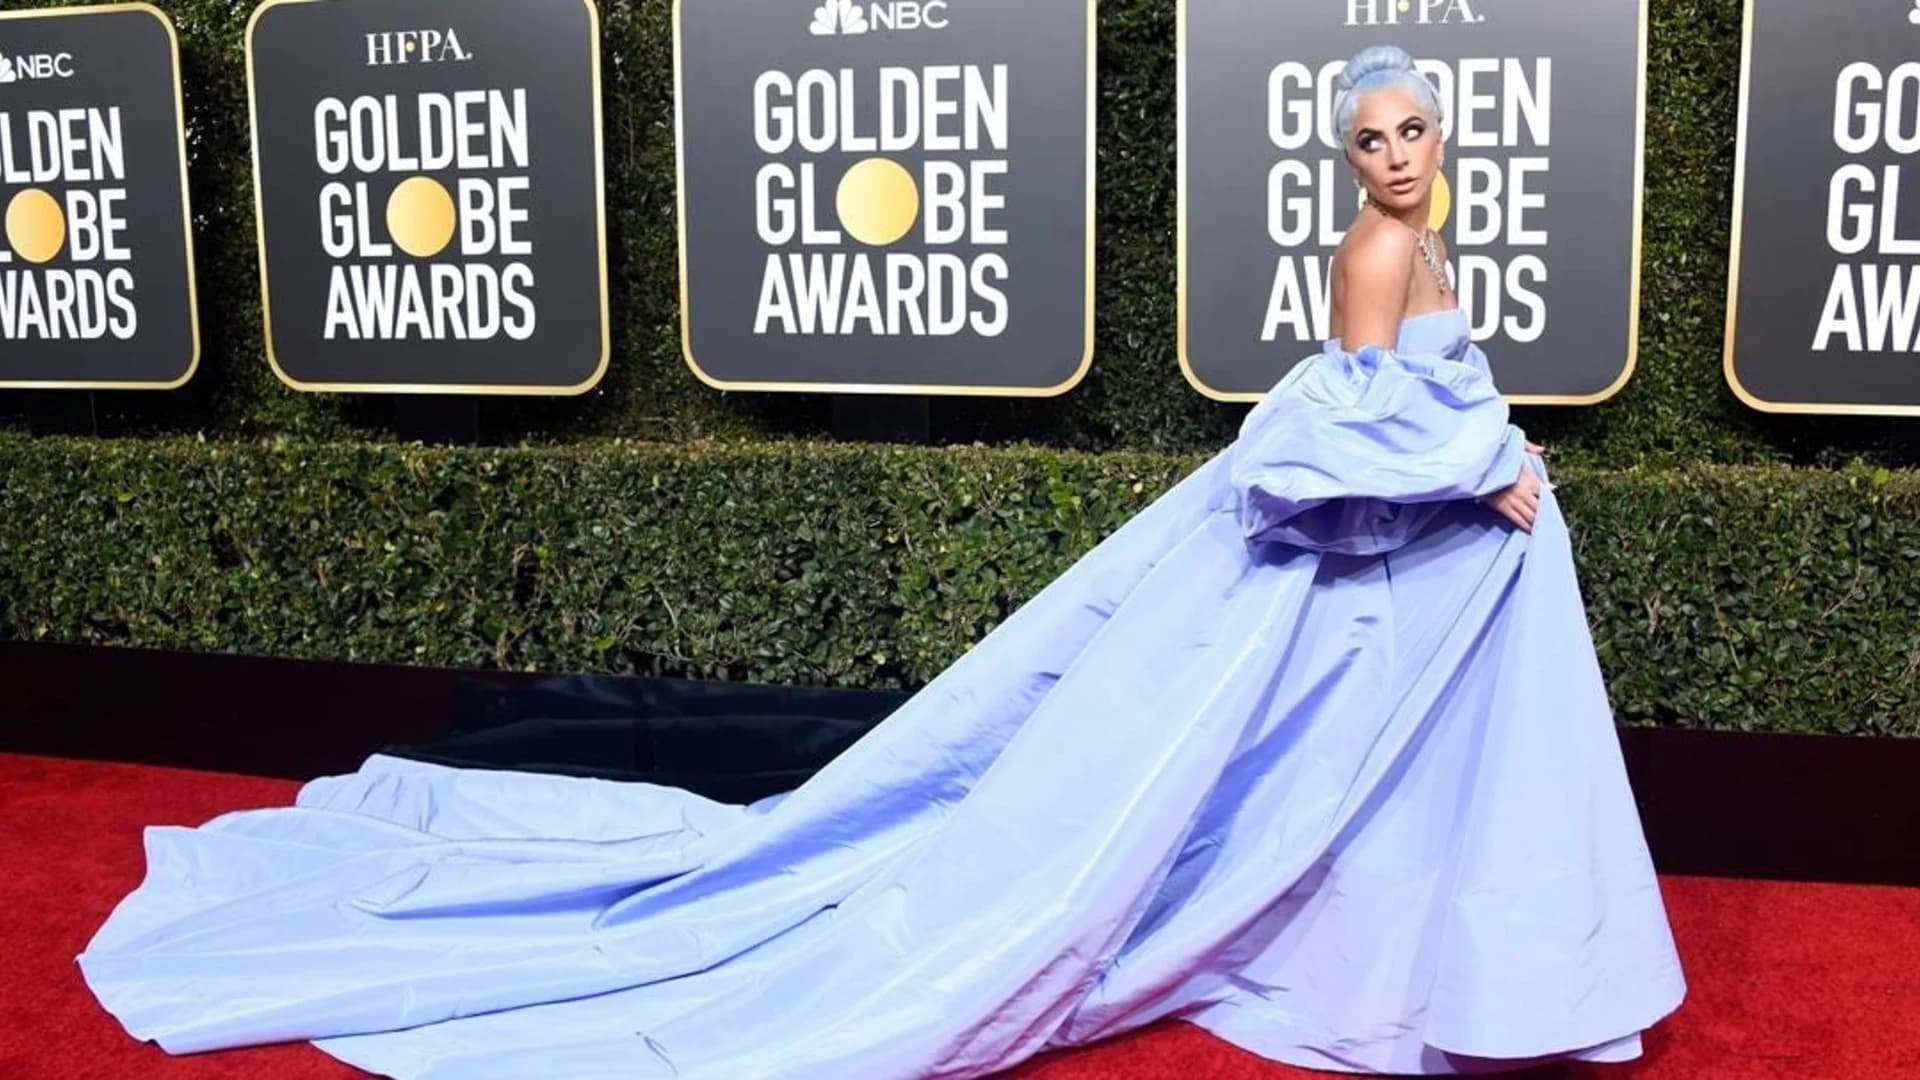 Sights and scenes at the 76th annual Golden Globe Awards